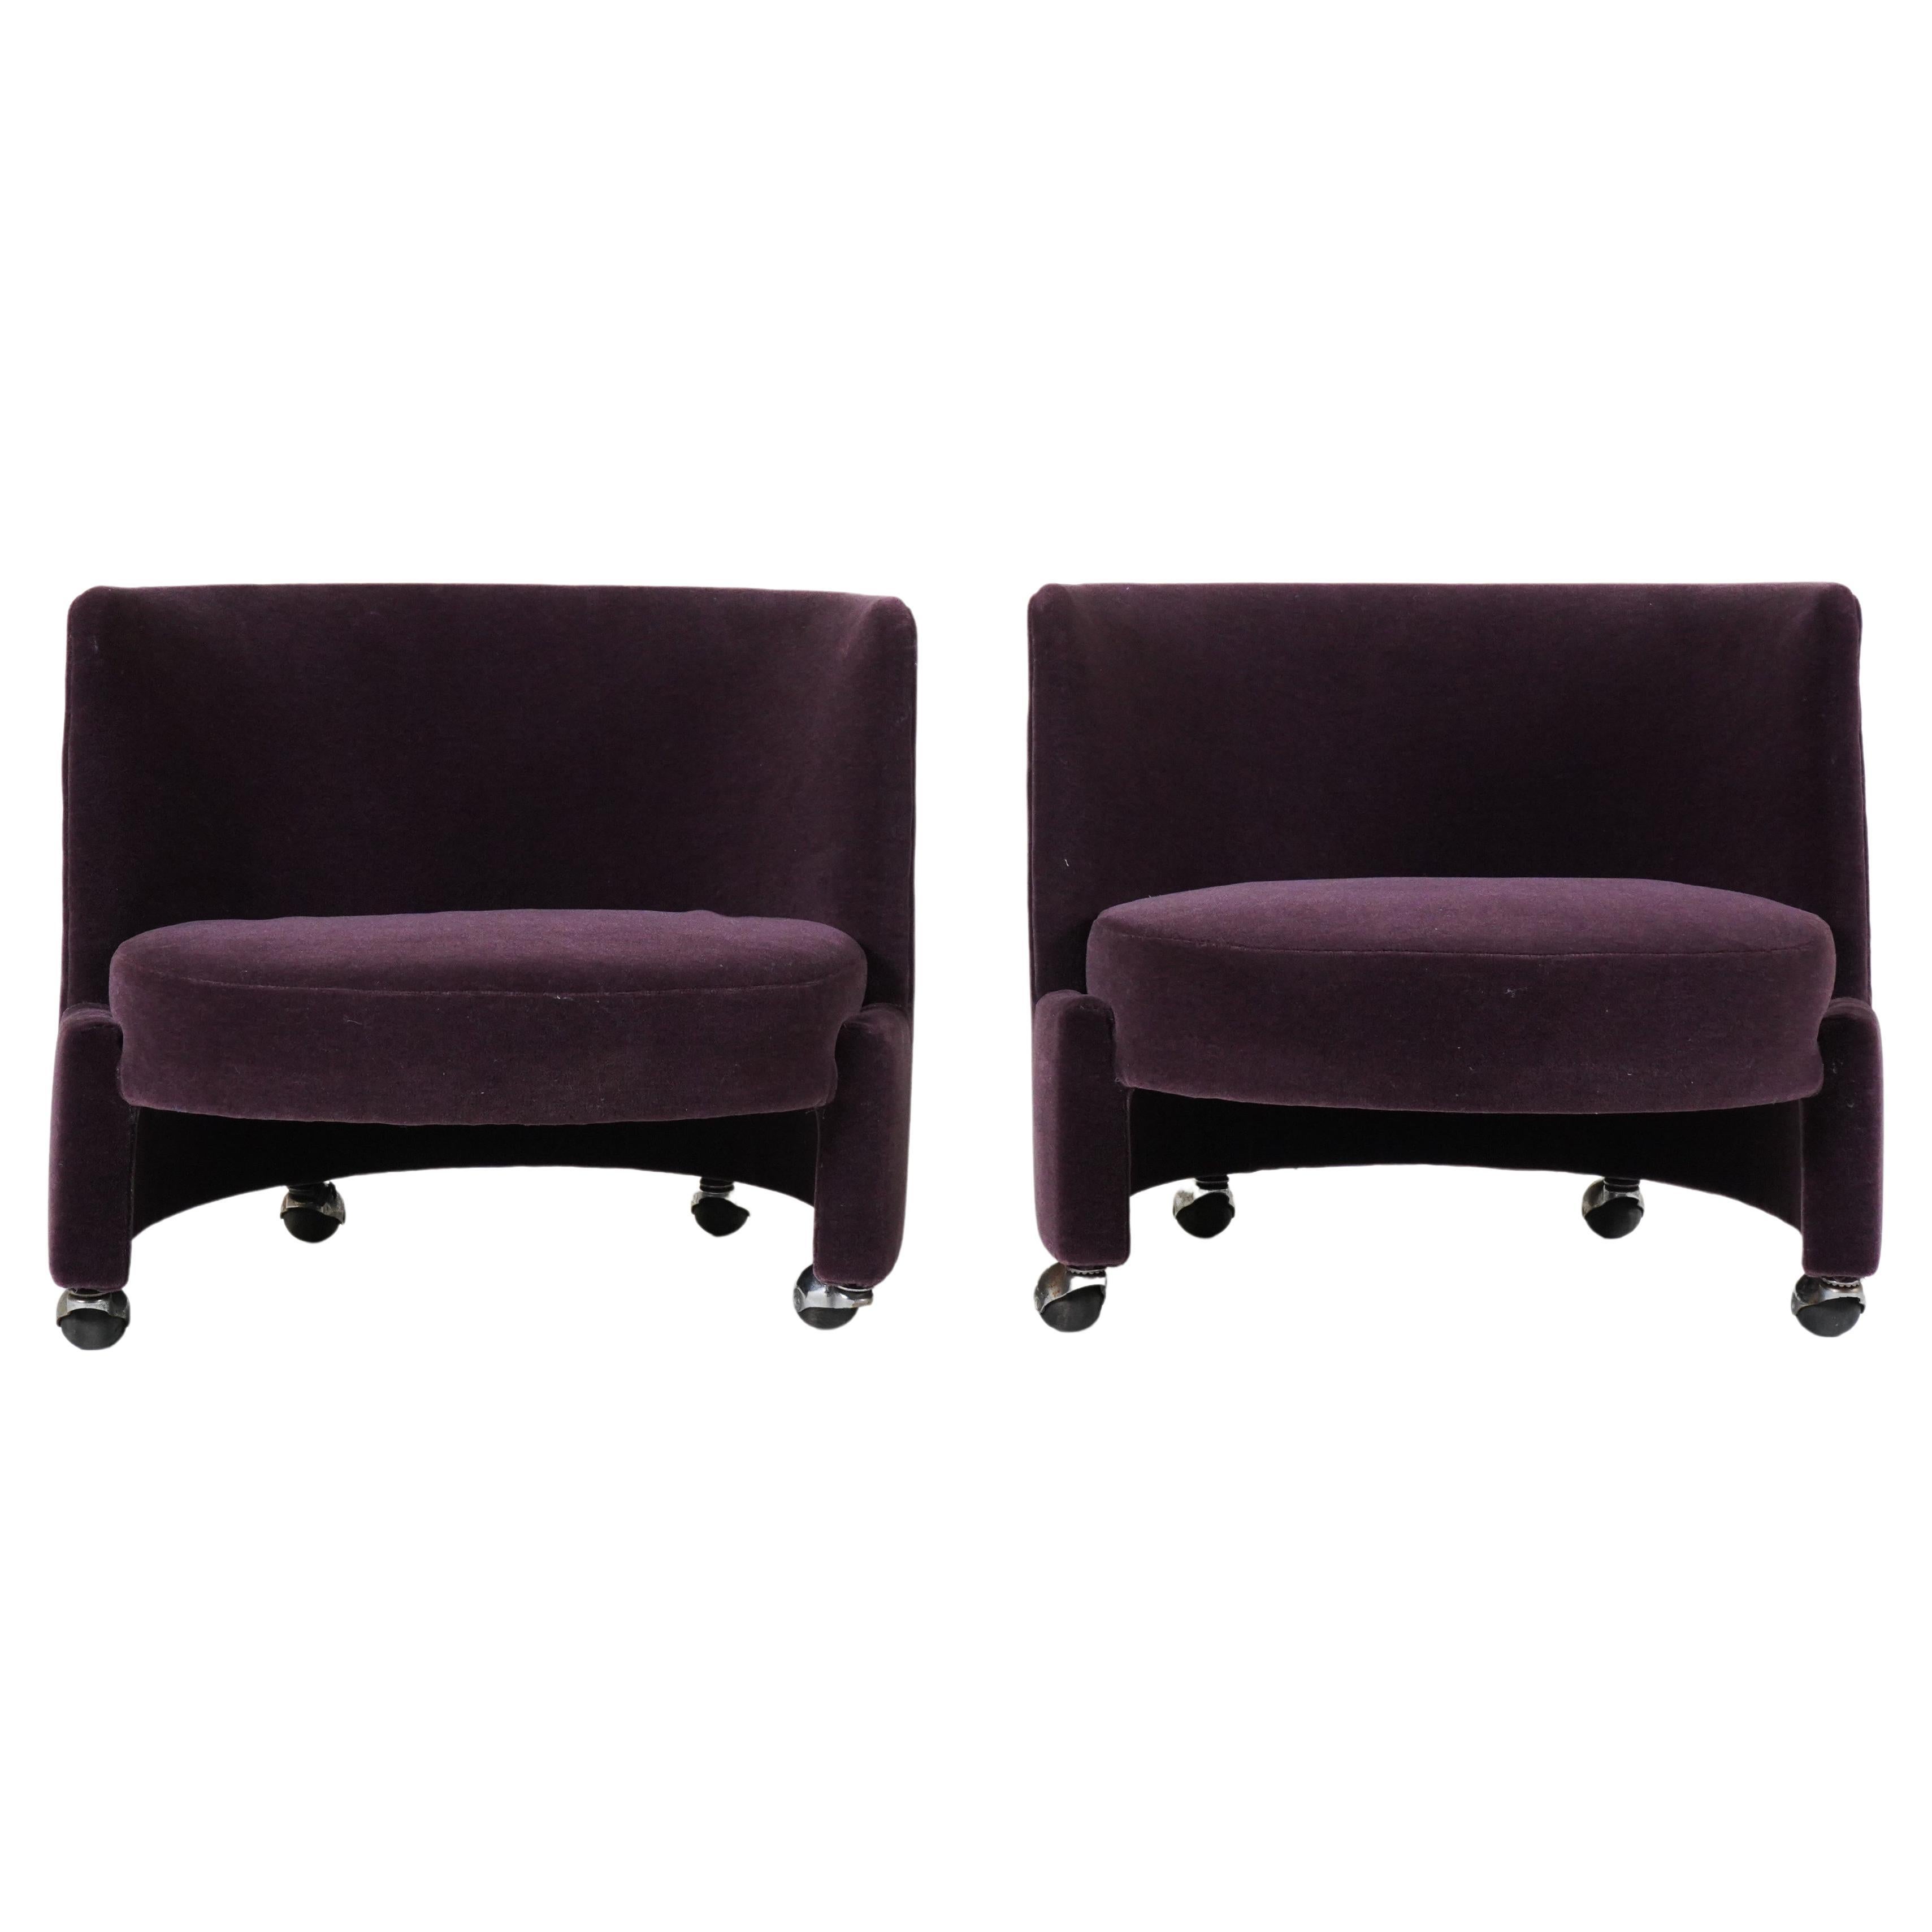 A Pair of Petite Mid-Century Socialist Lounge Chairs  For Sale